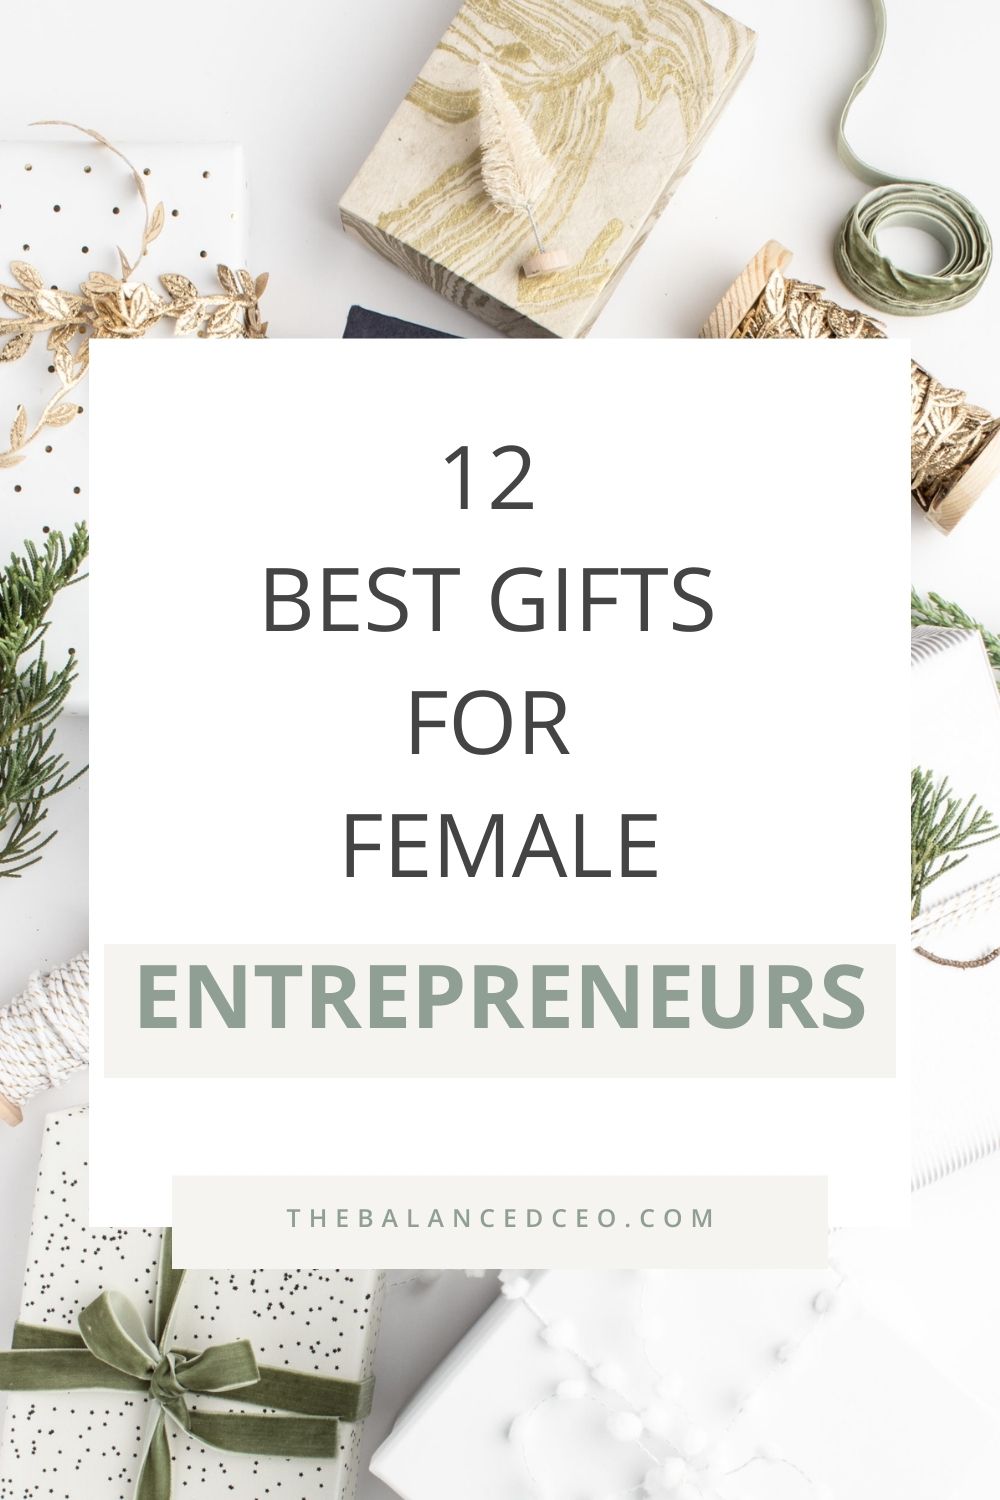 12 Entrepreneurs Reveal the Best Gift They Ever Received